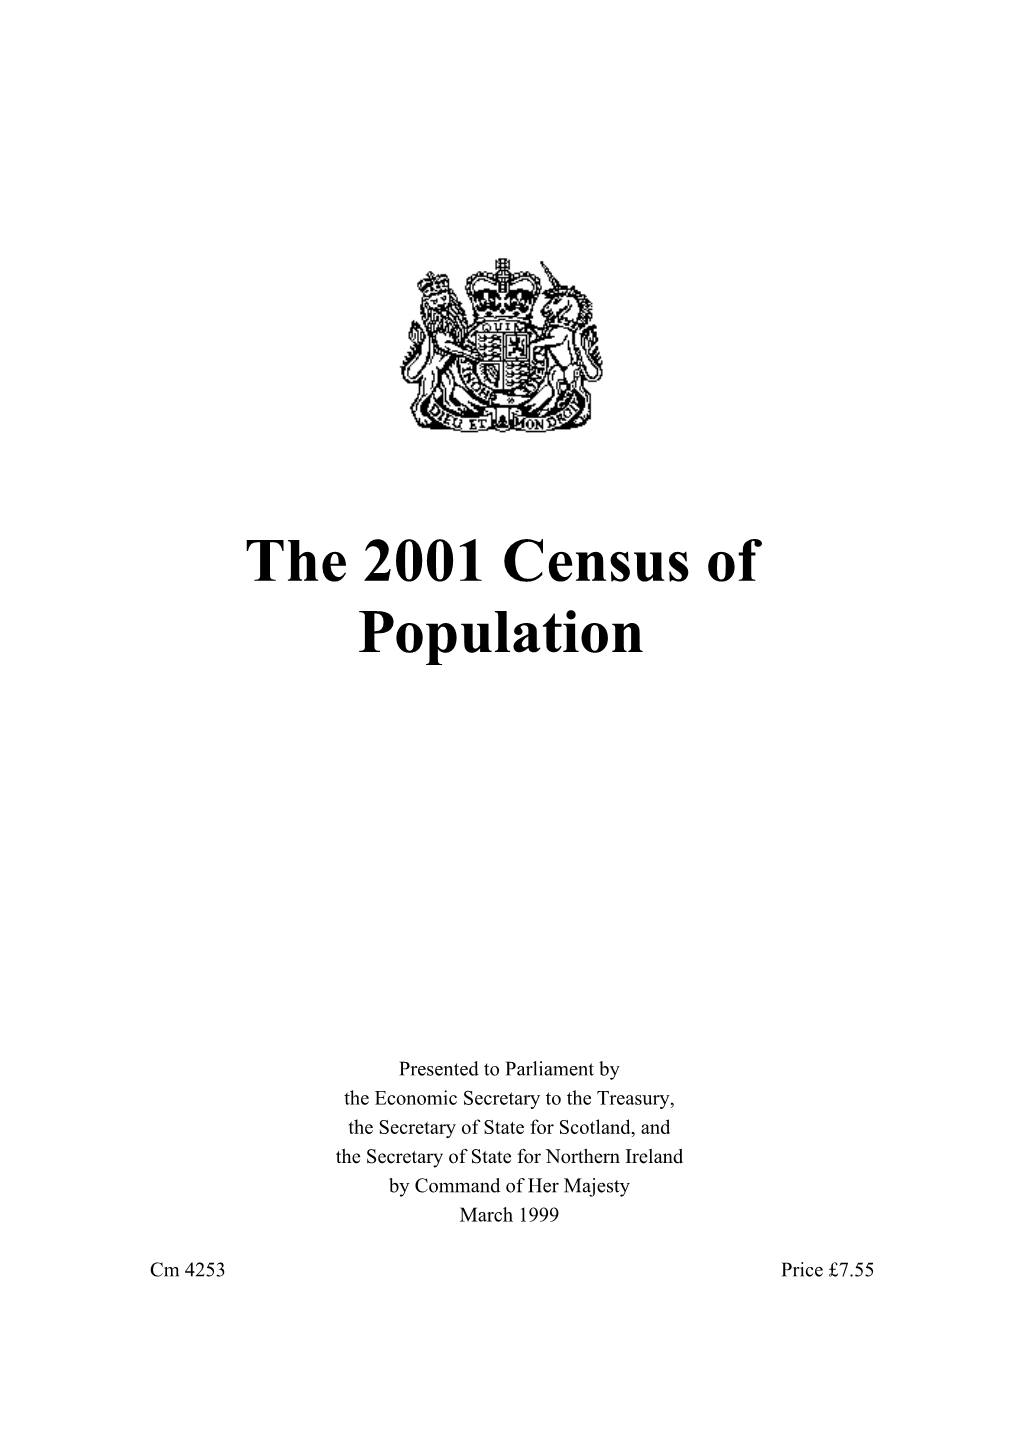 The 2001 Census of Population